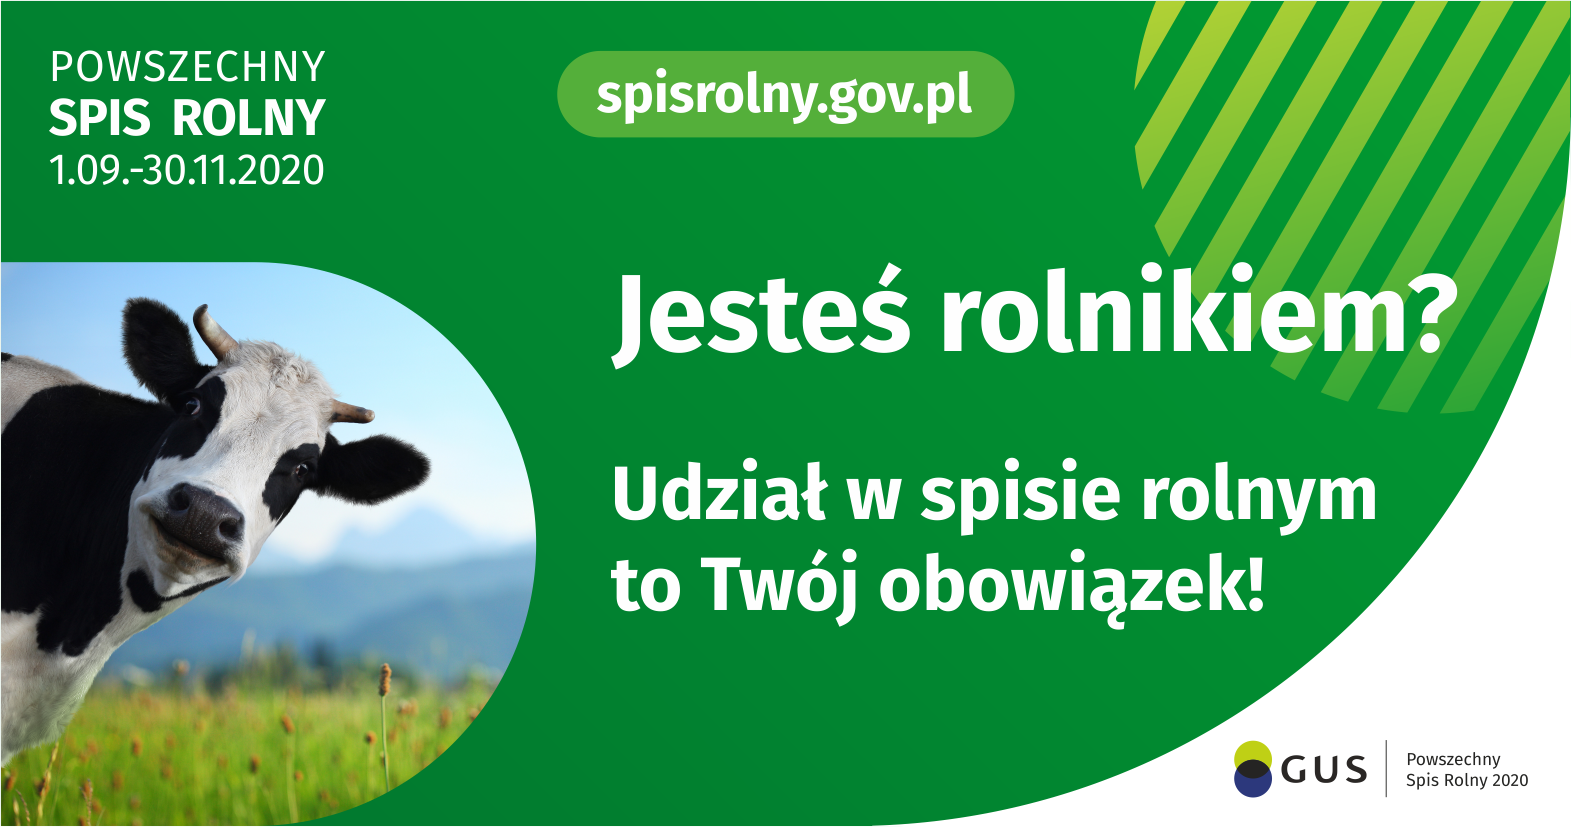 You are currently viewing Powszechny Spis Rolny 2020